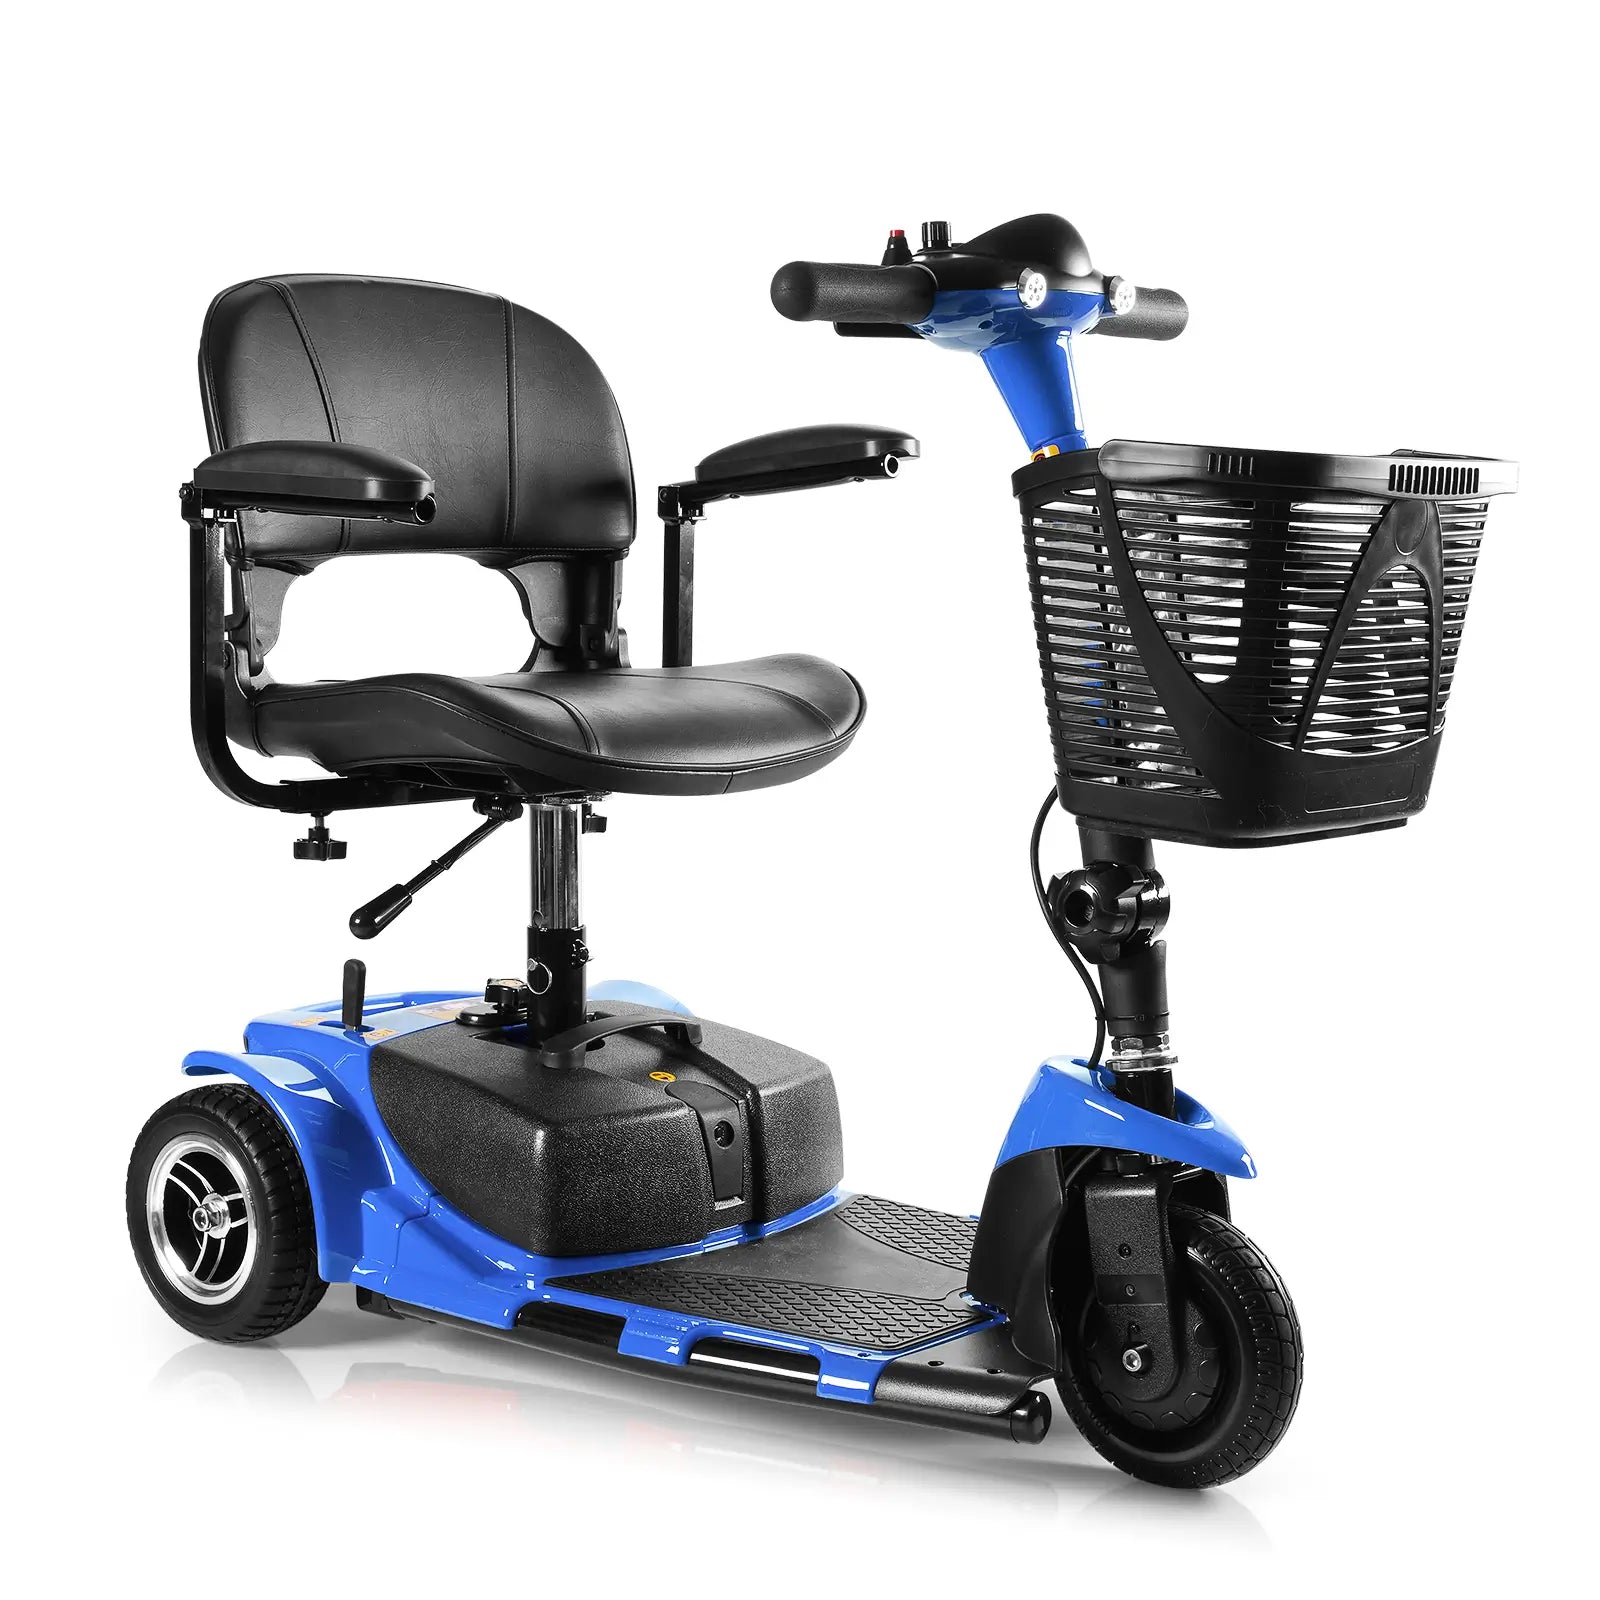 Soulout 3 Wheel Electric Mobility Scooter-Blue